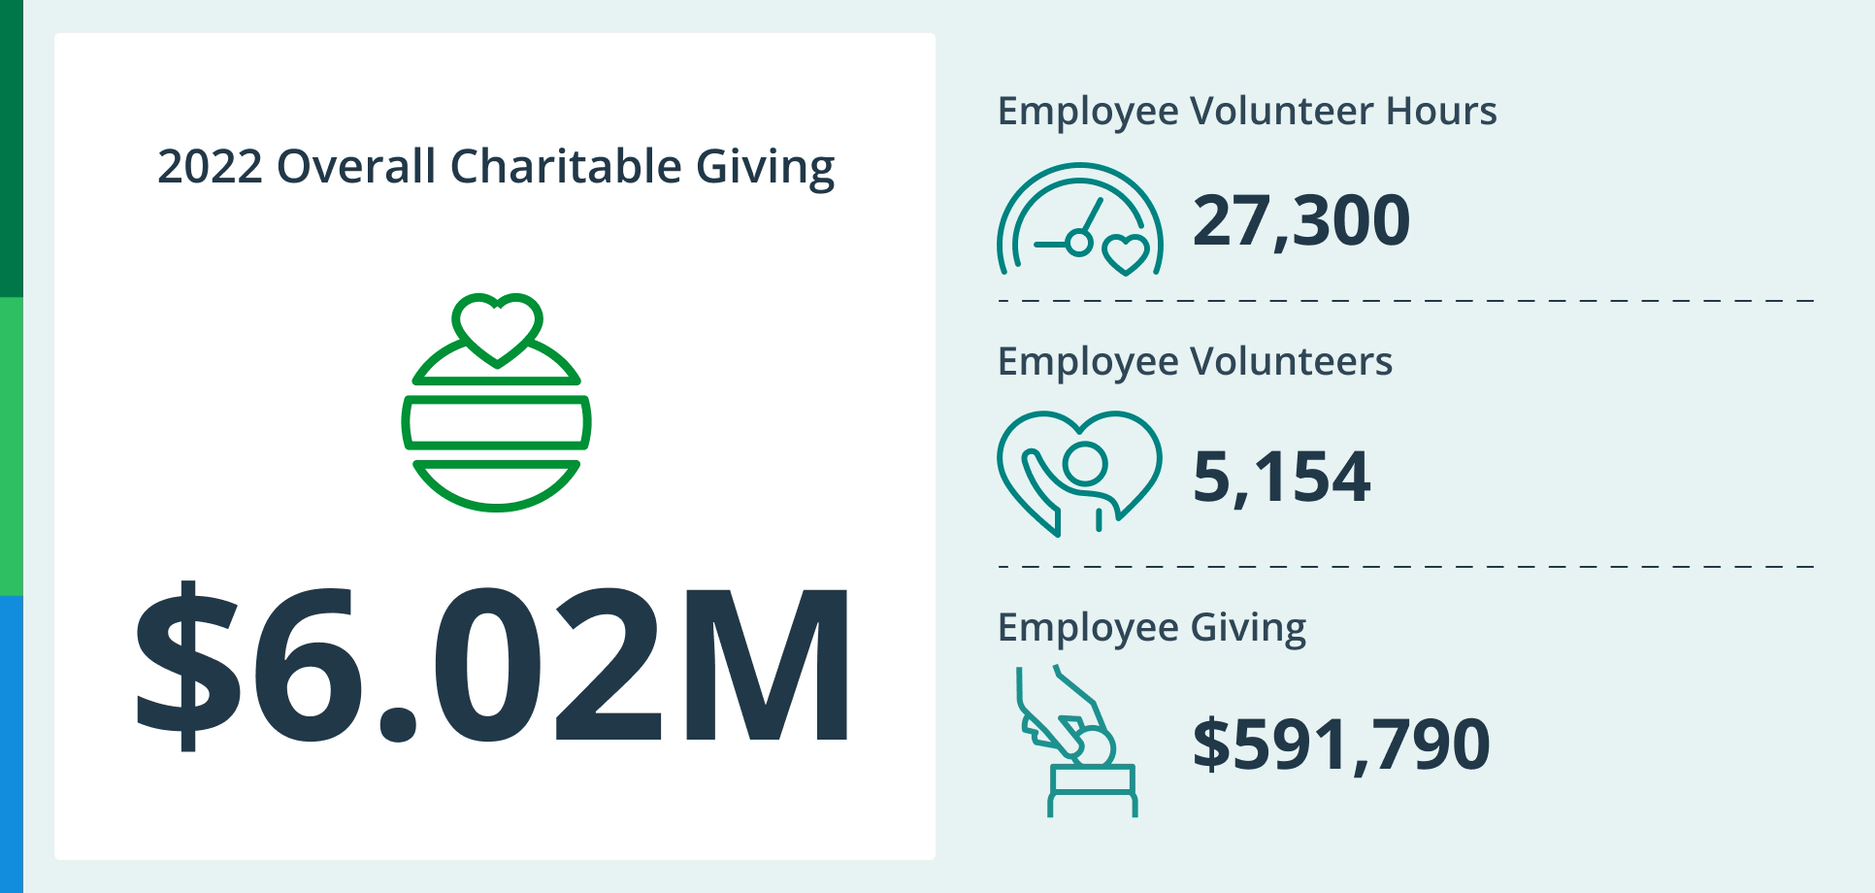 Eversource charitable giving and volunteer hours infographic